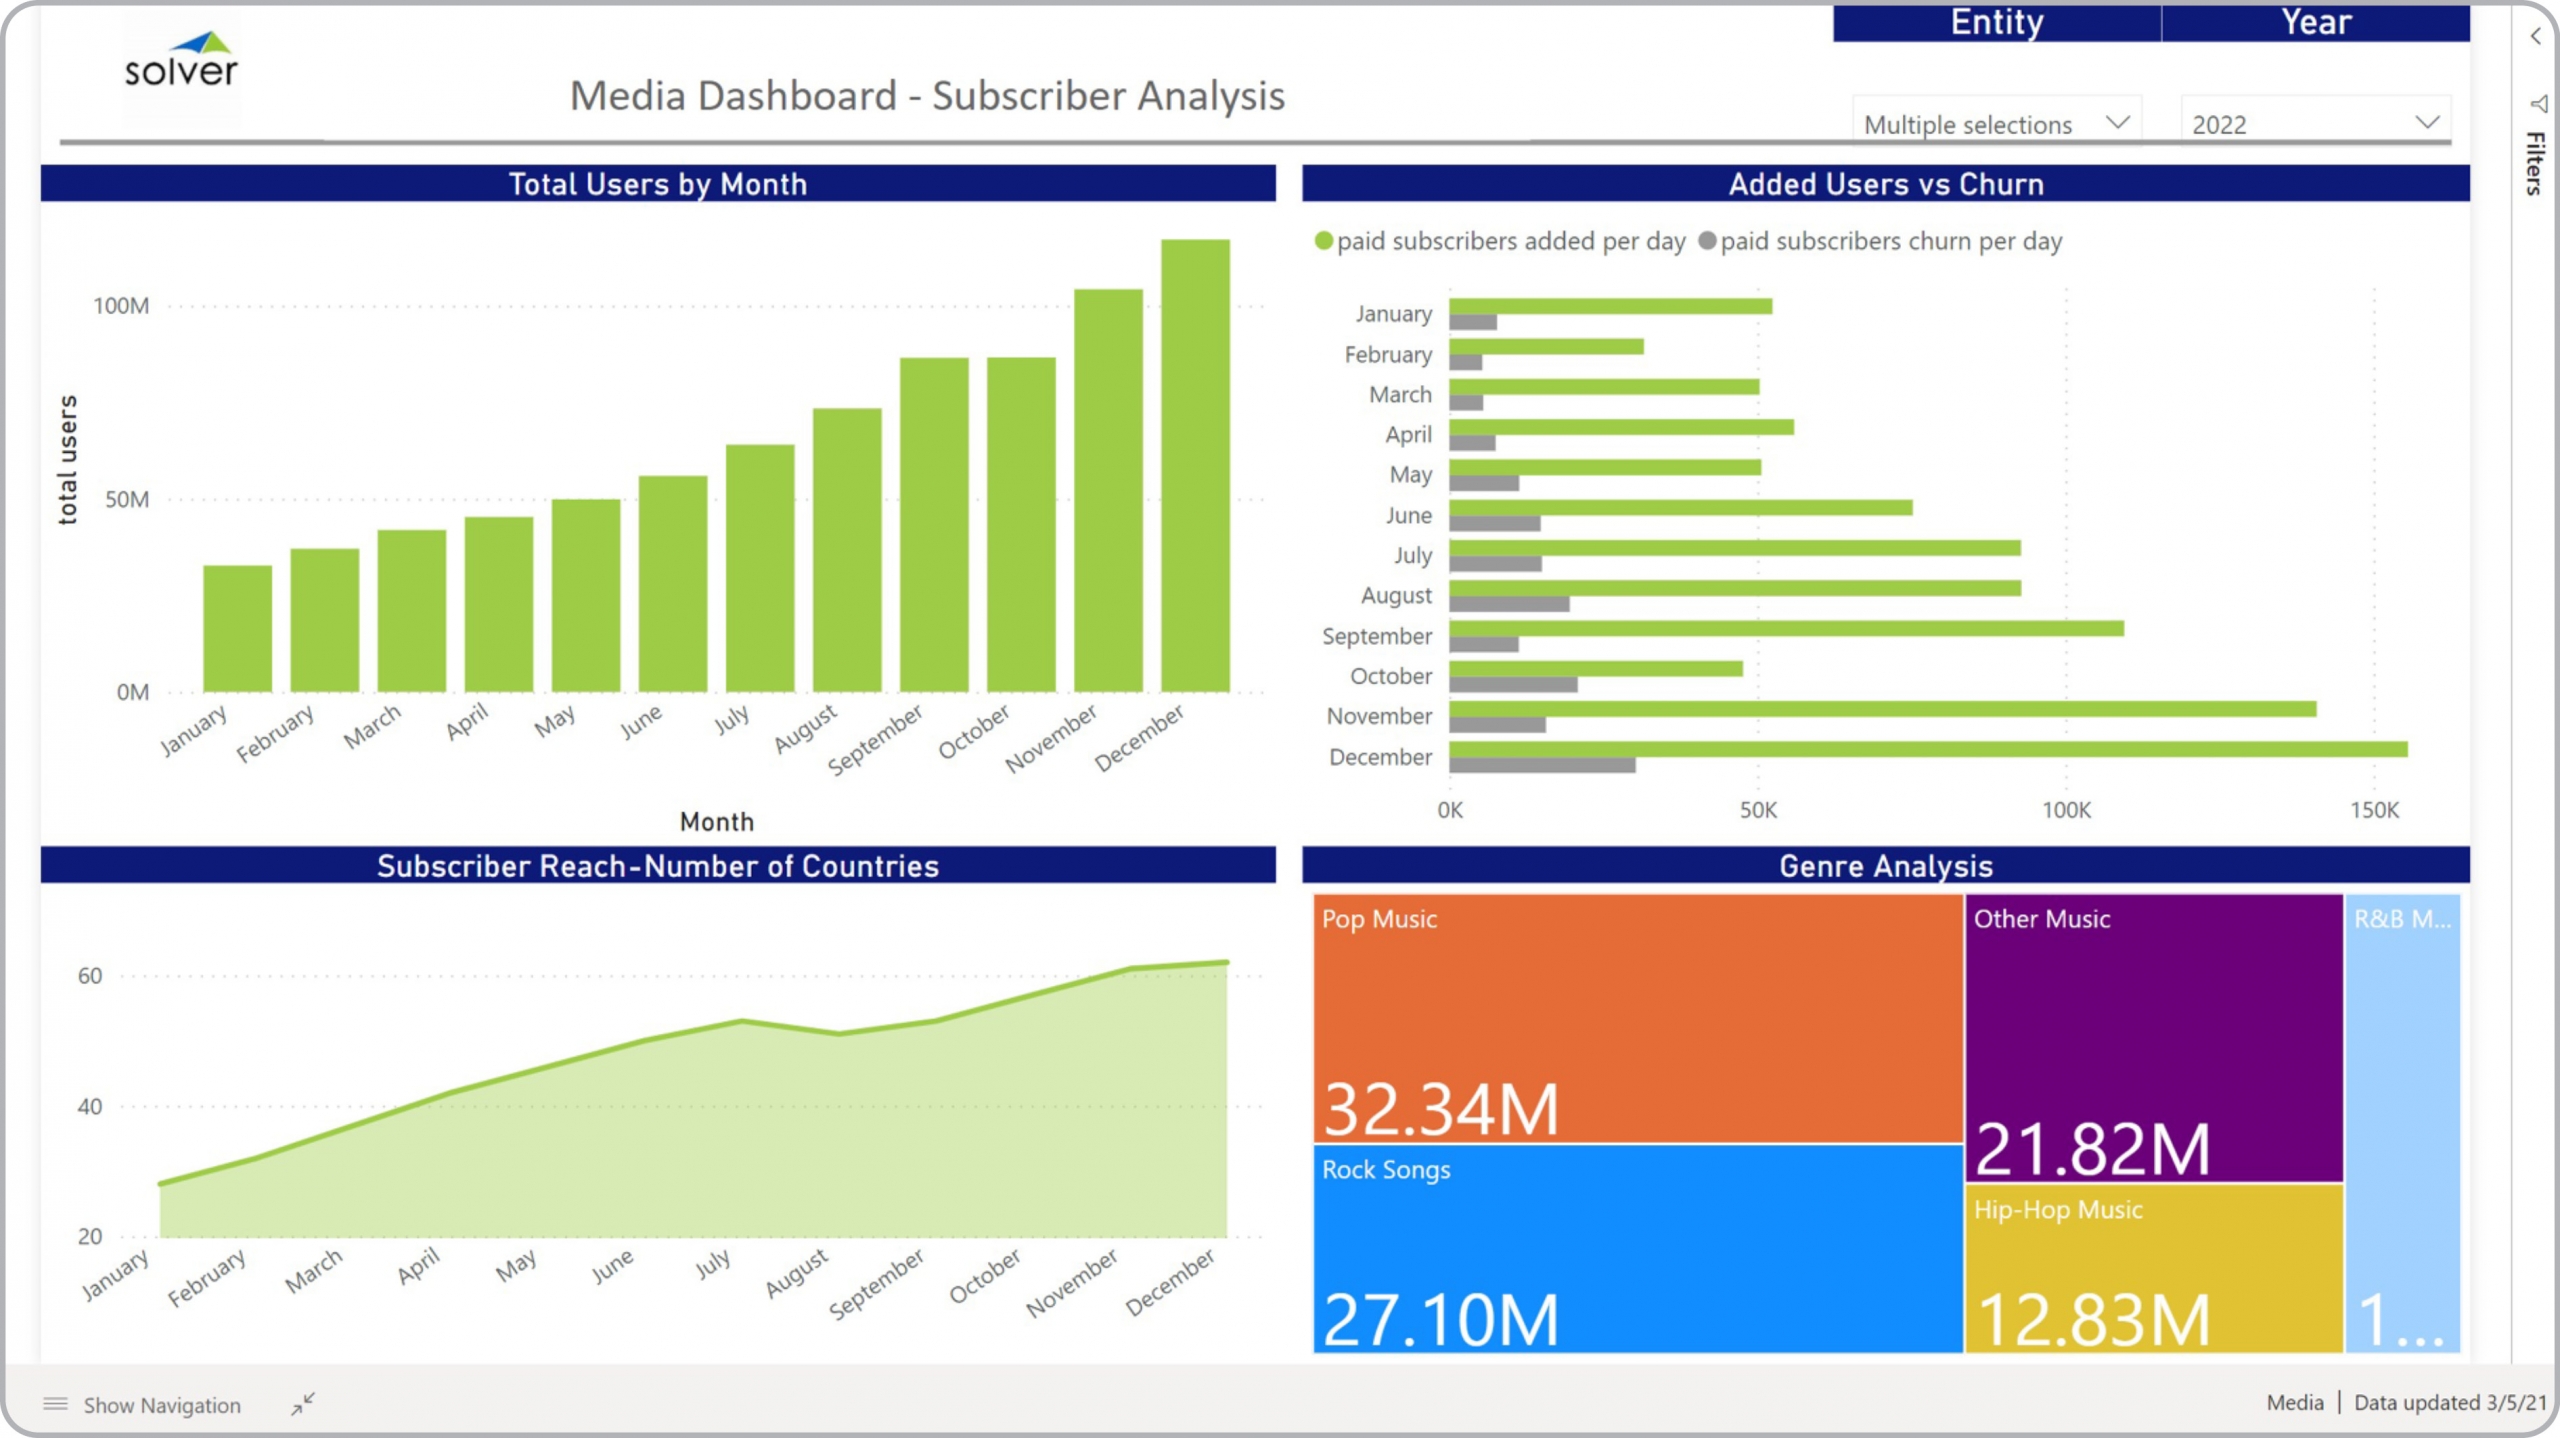 Example of a Subscriber Dashboard for Media Companies 